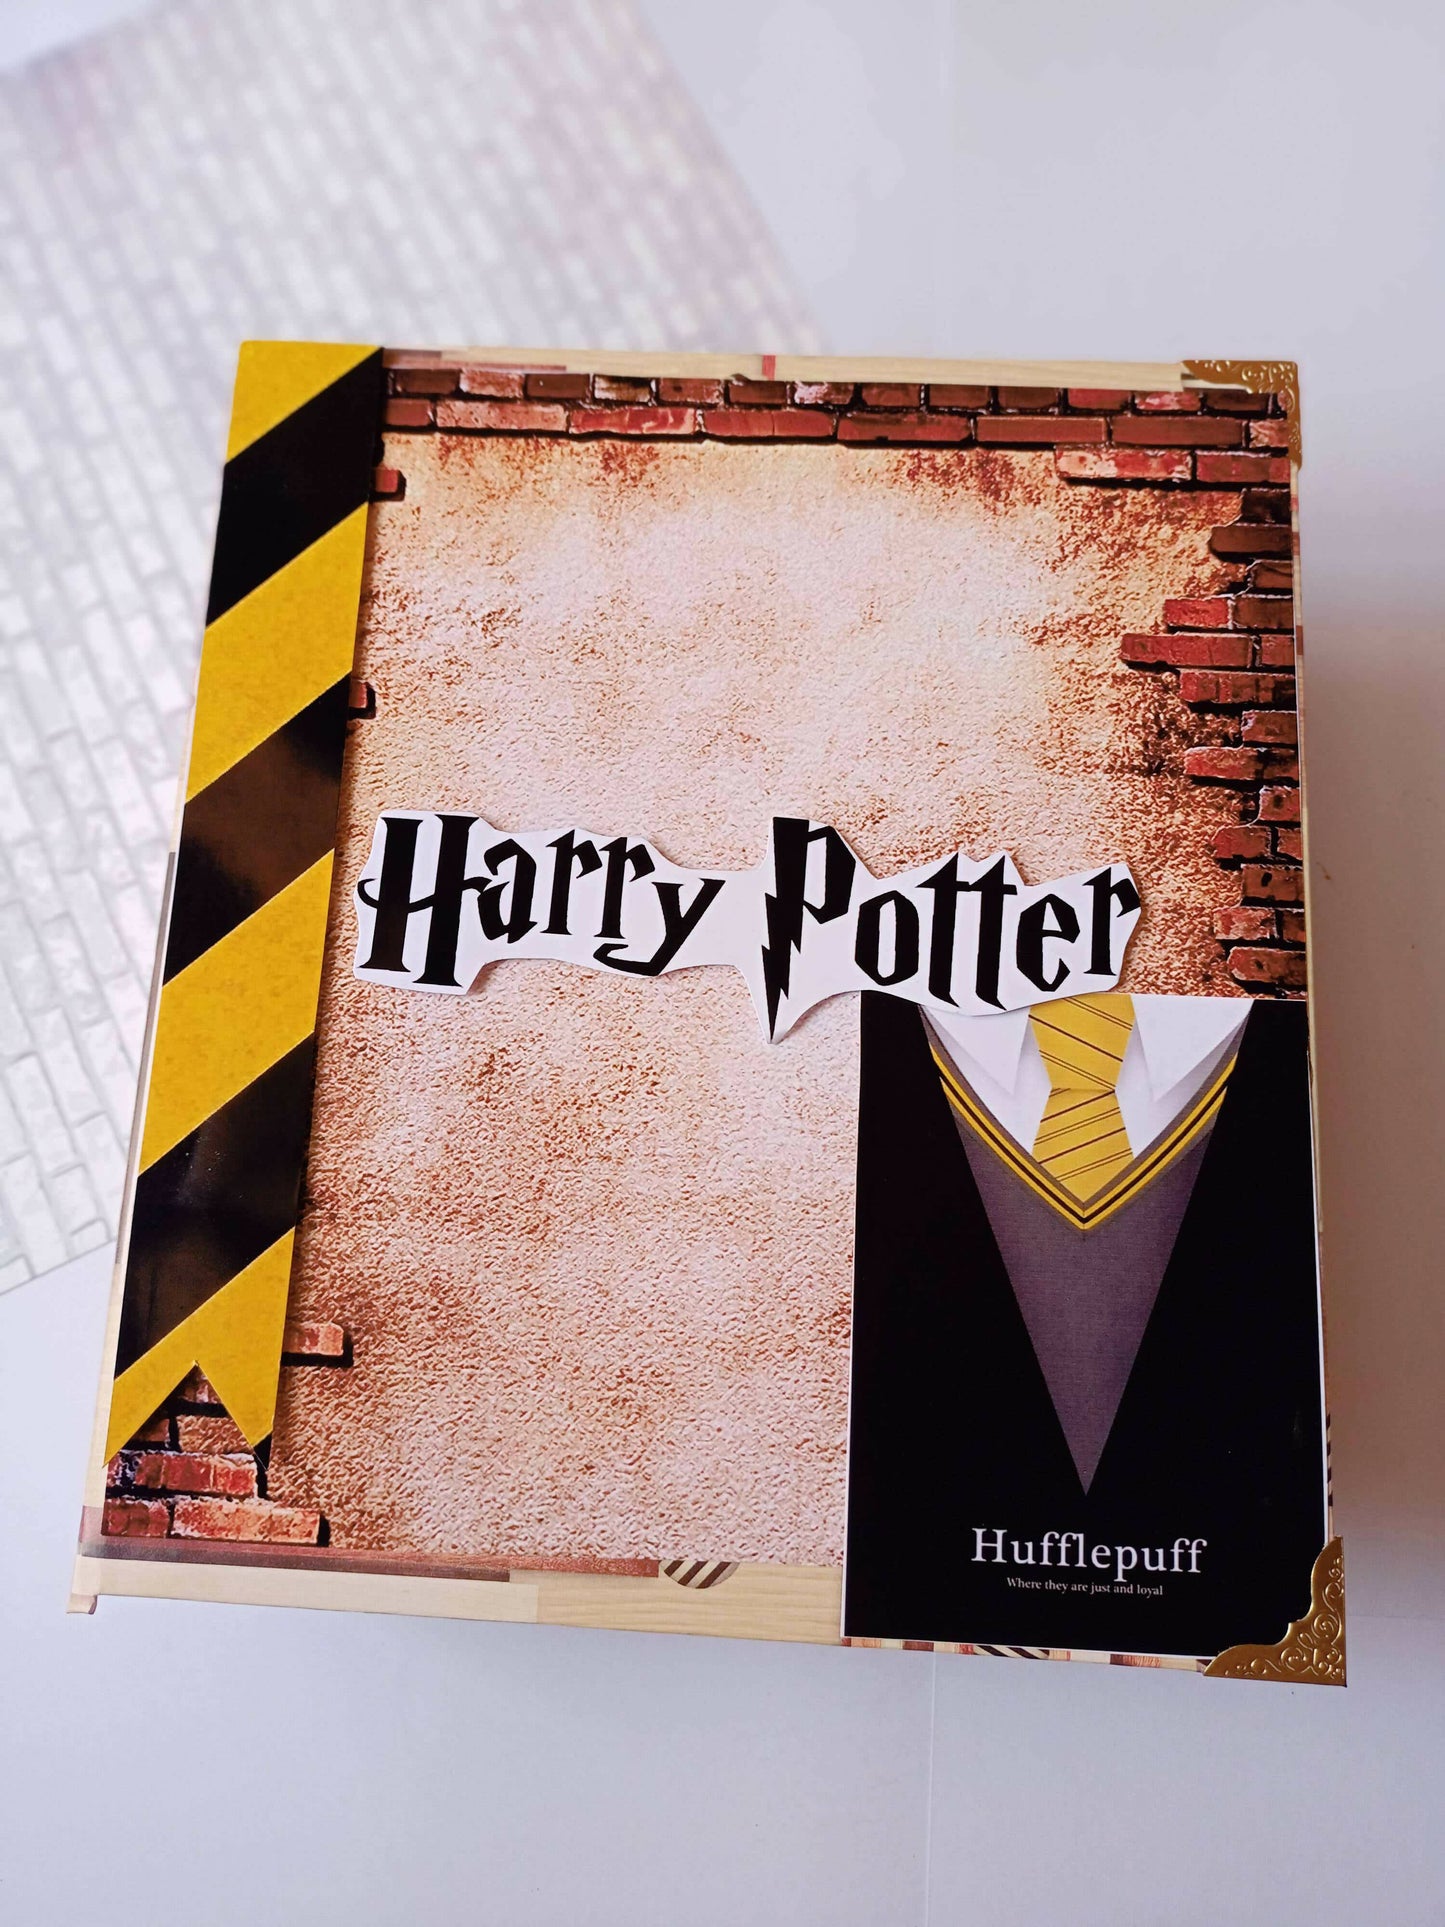 Hufflepuff harry potter scrapbook personalised with photos for him and her